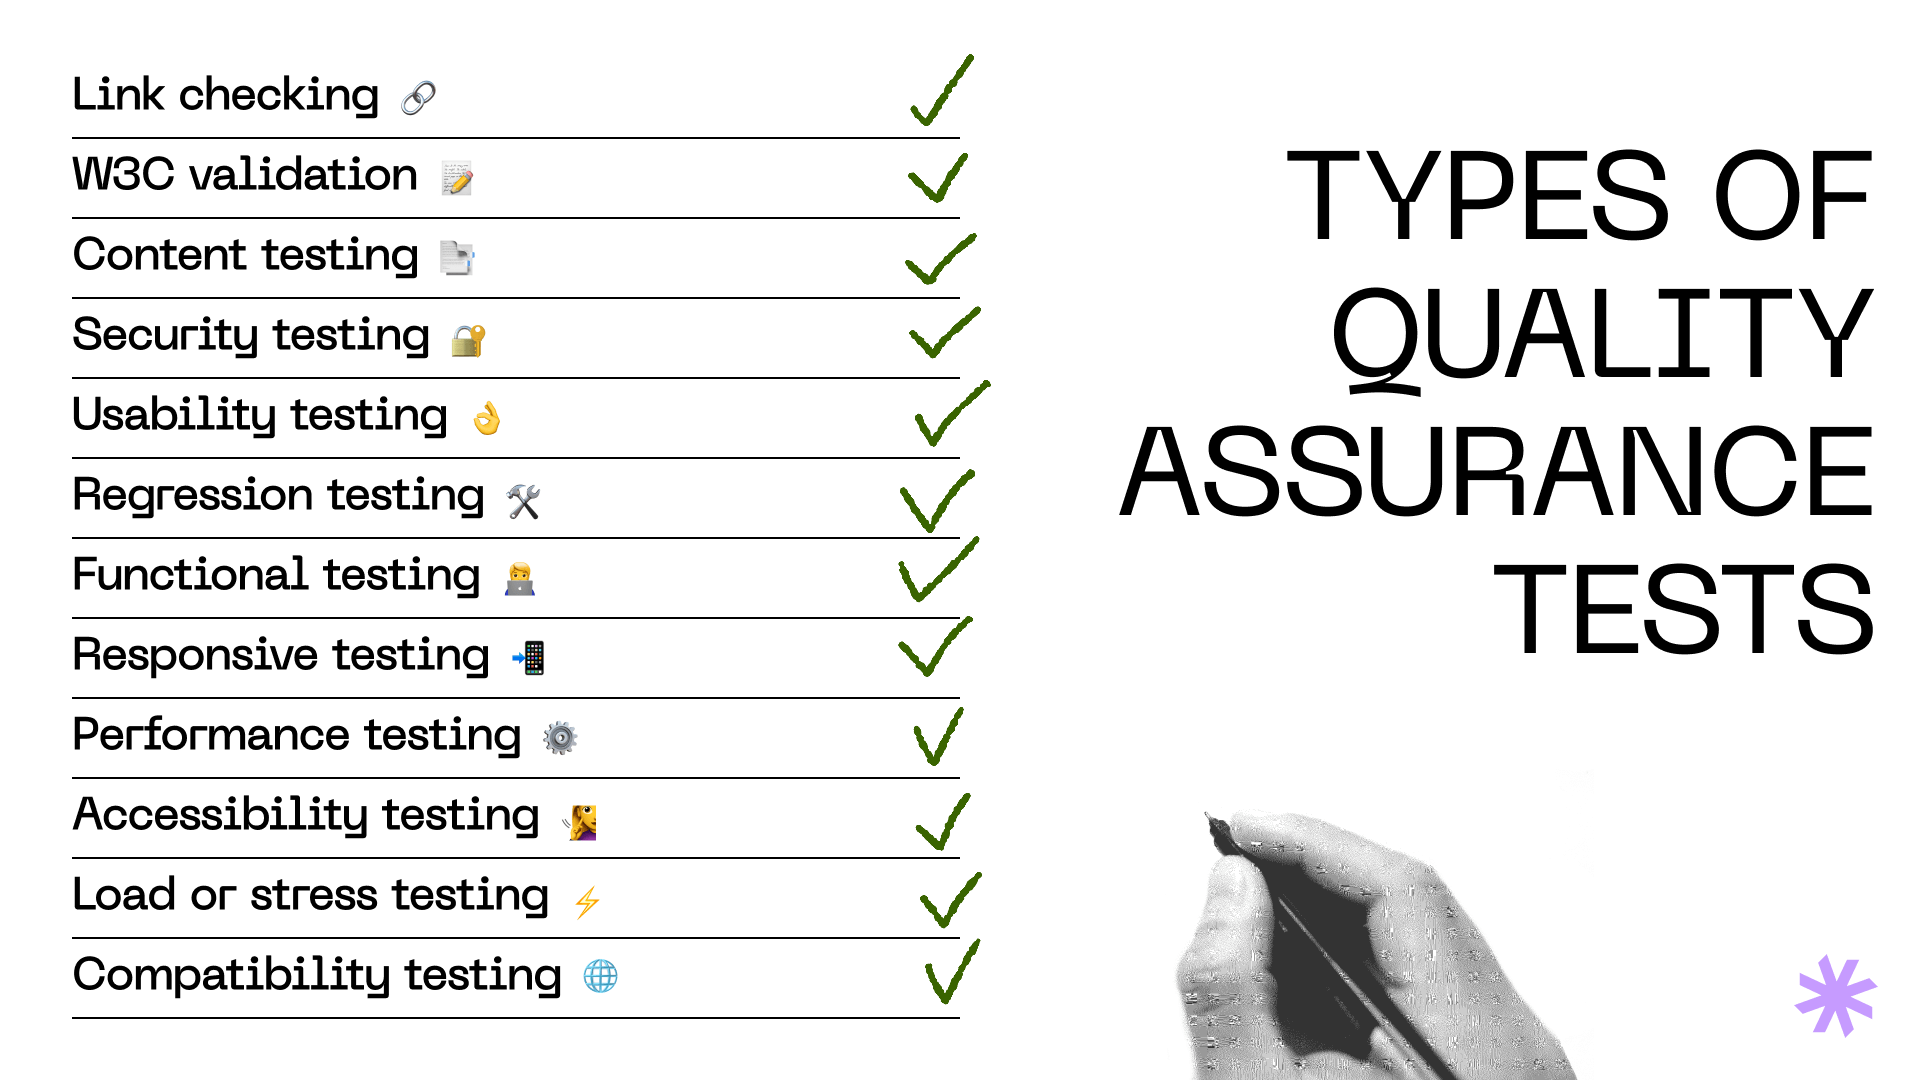 Types of quality assurance tests